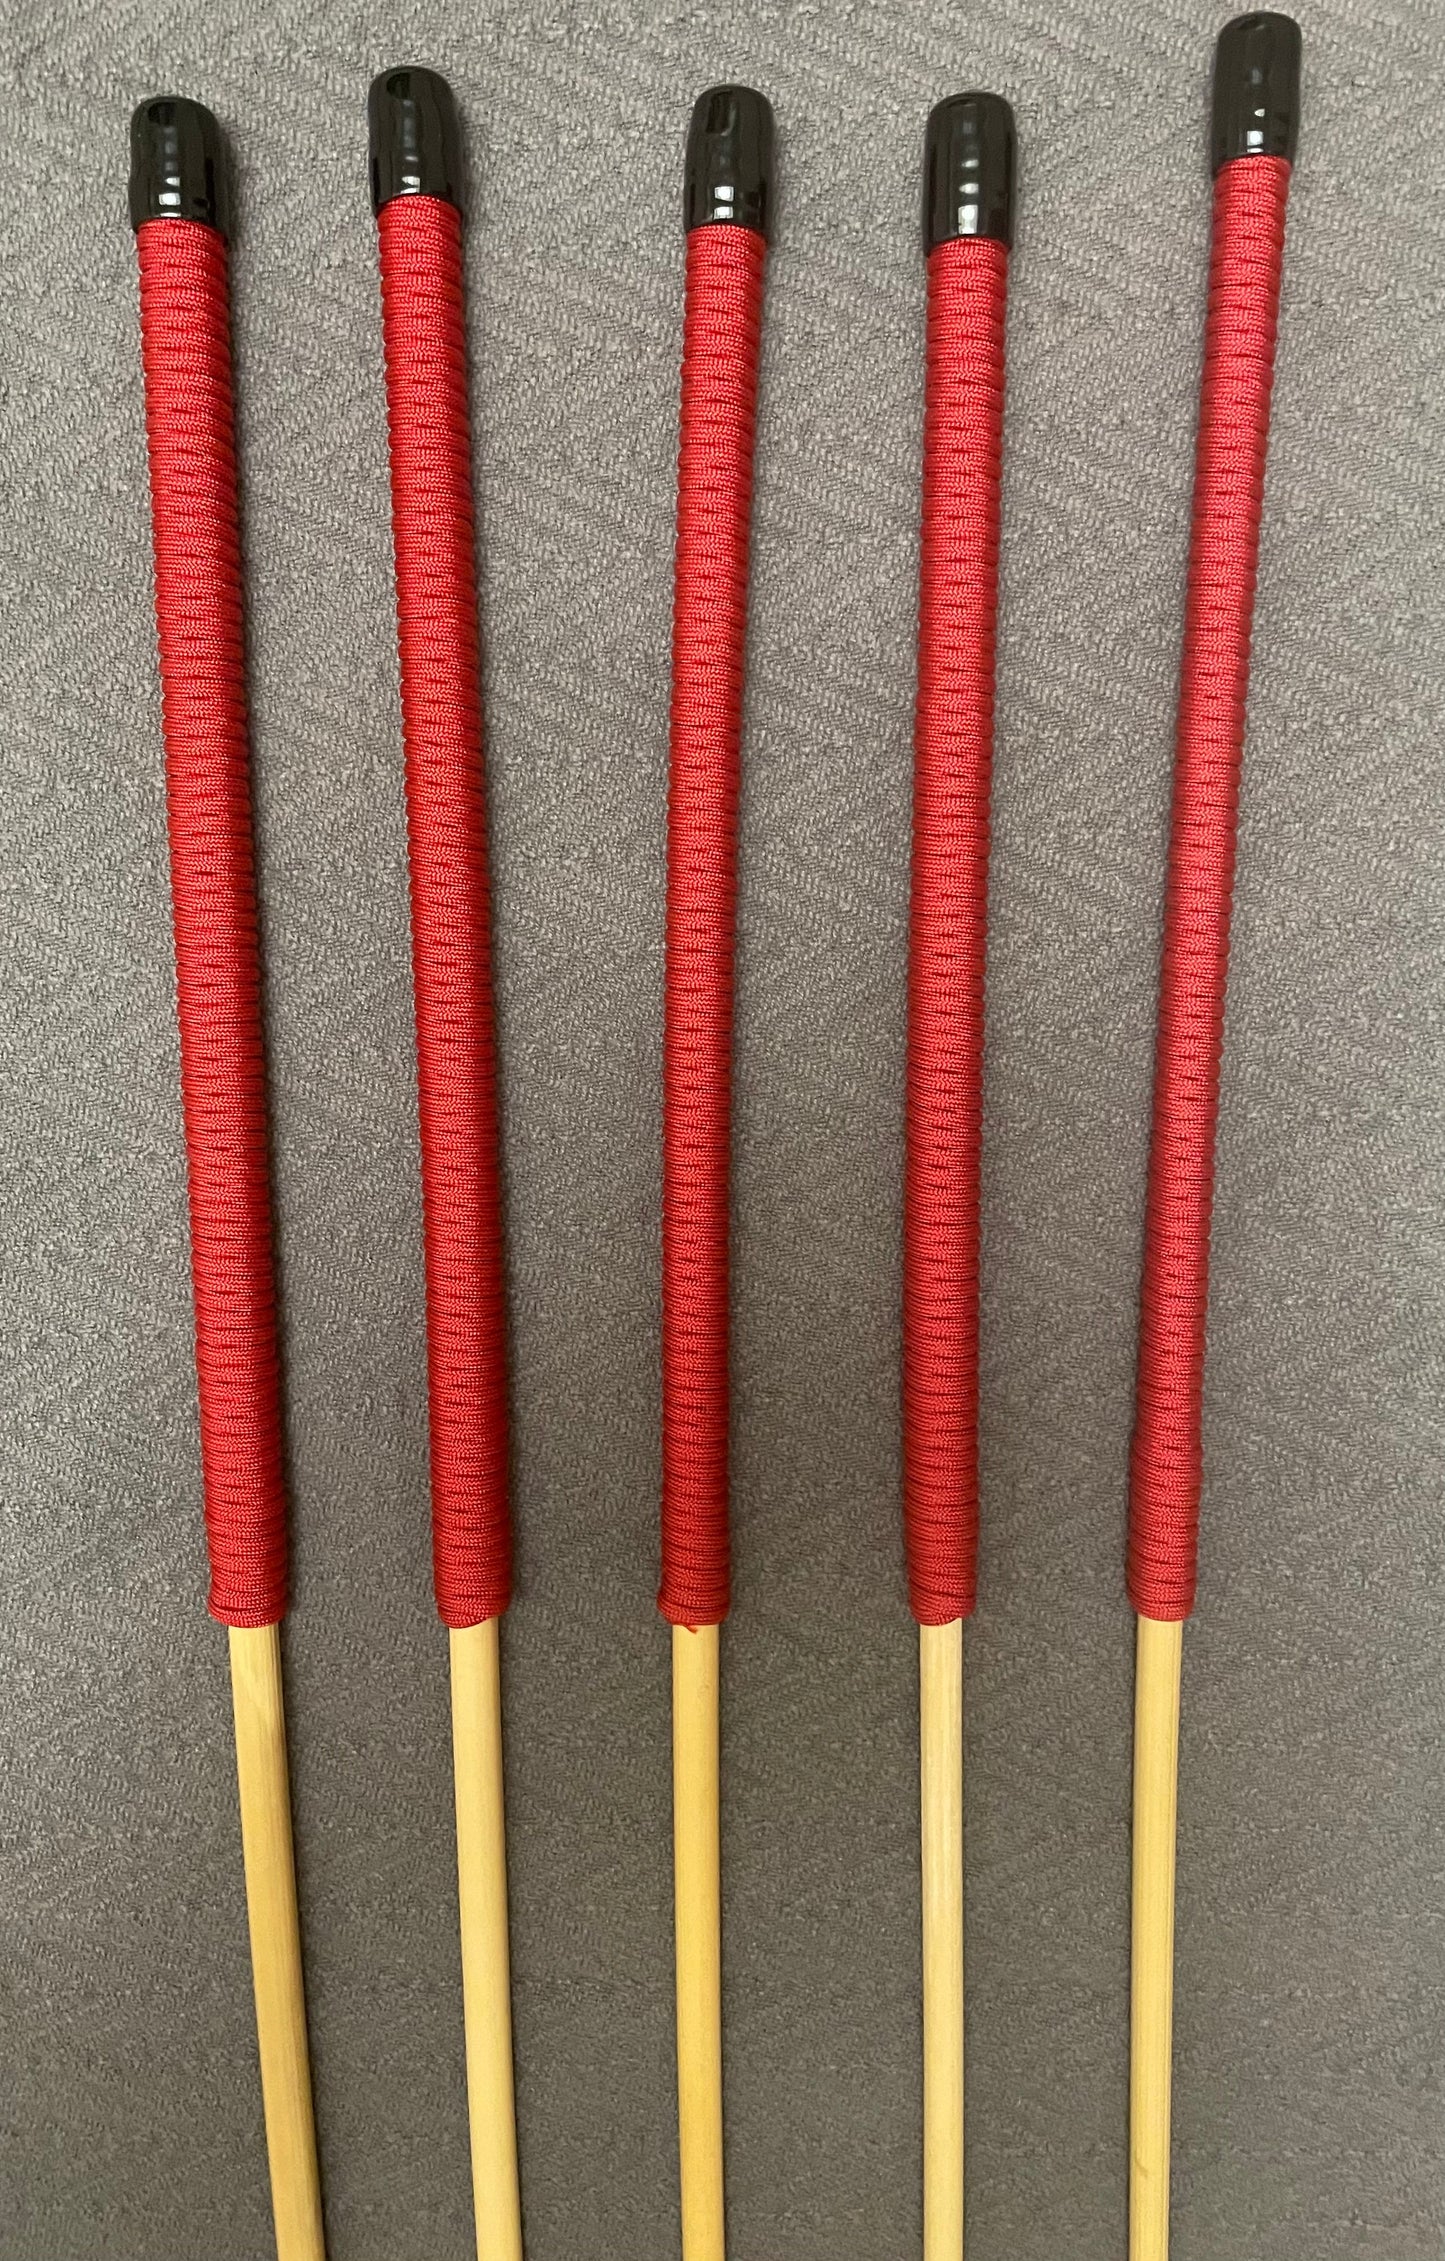 Set of 5 Knotless Dragon Canes / Ultimate Canes / No Knot Canes / BDSM Canes - 85 cms Length - Black or Imperial Red Paracord Handles